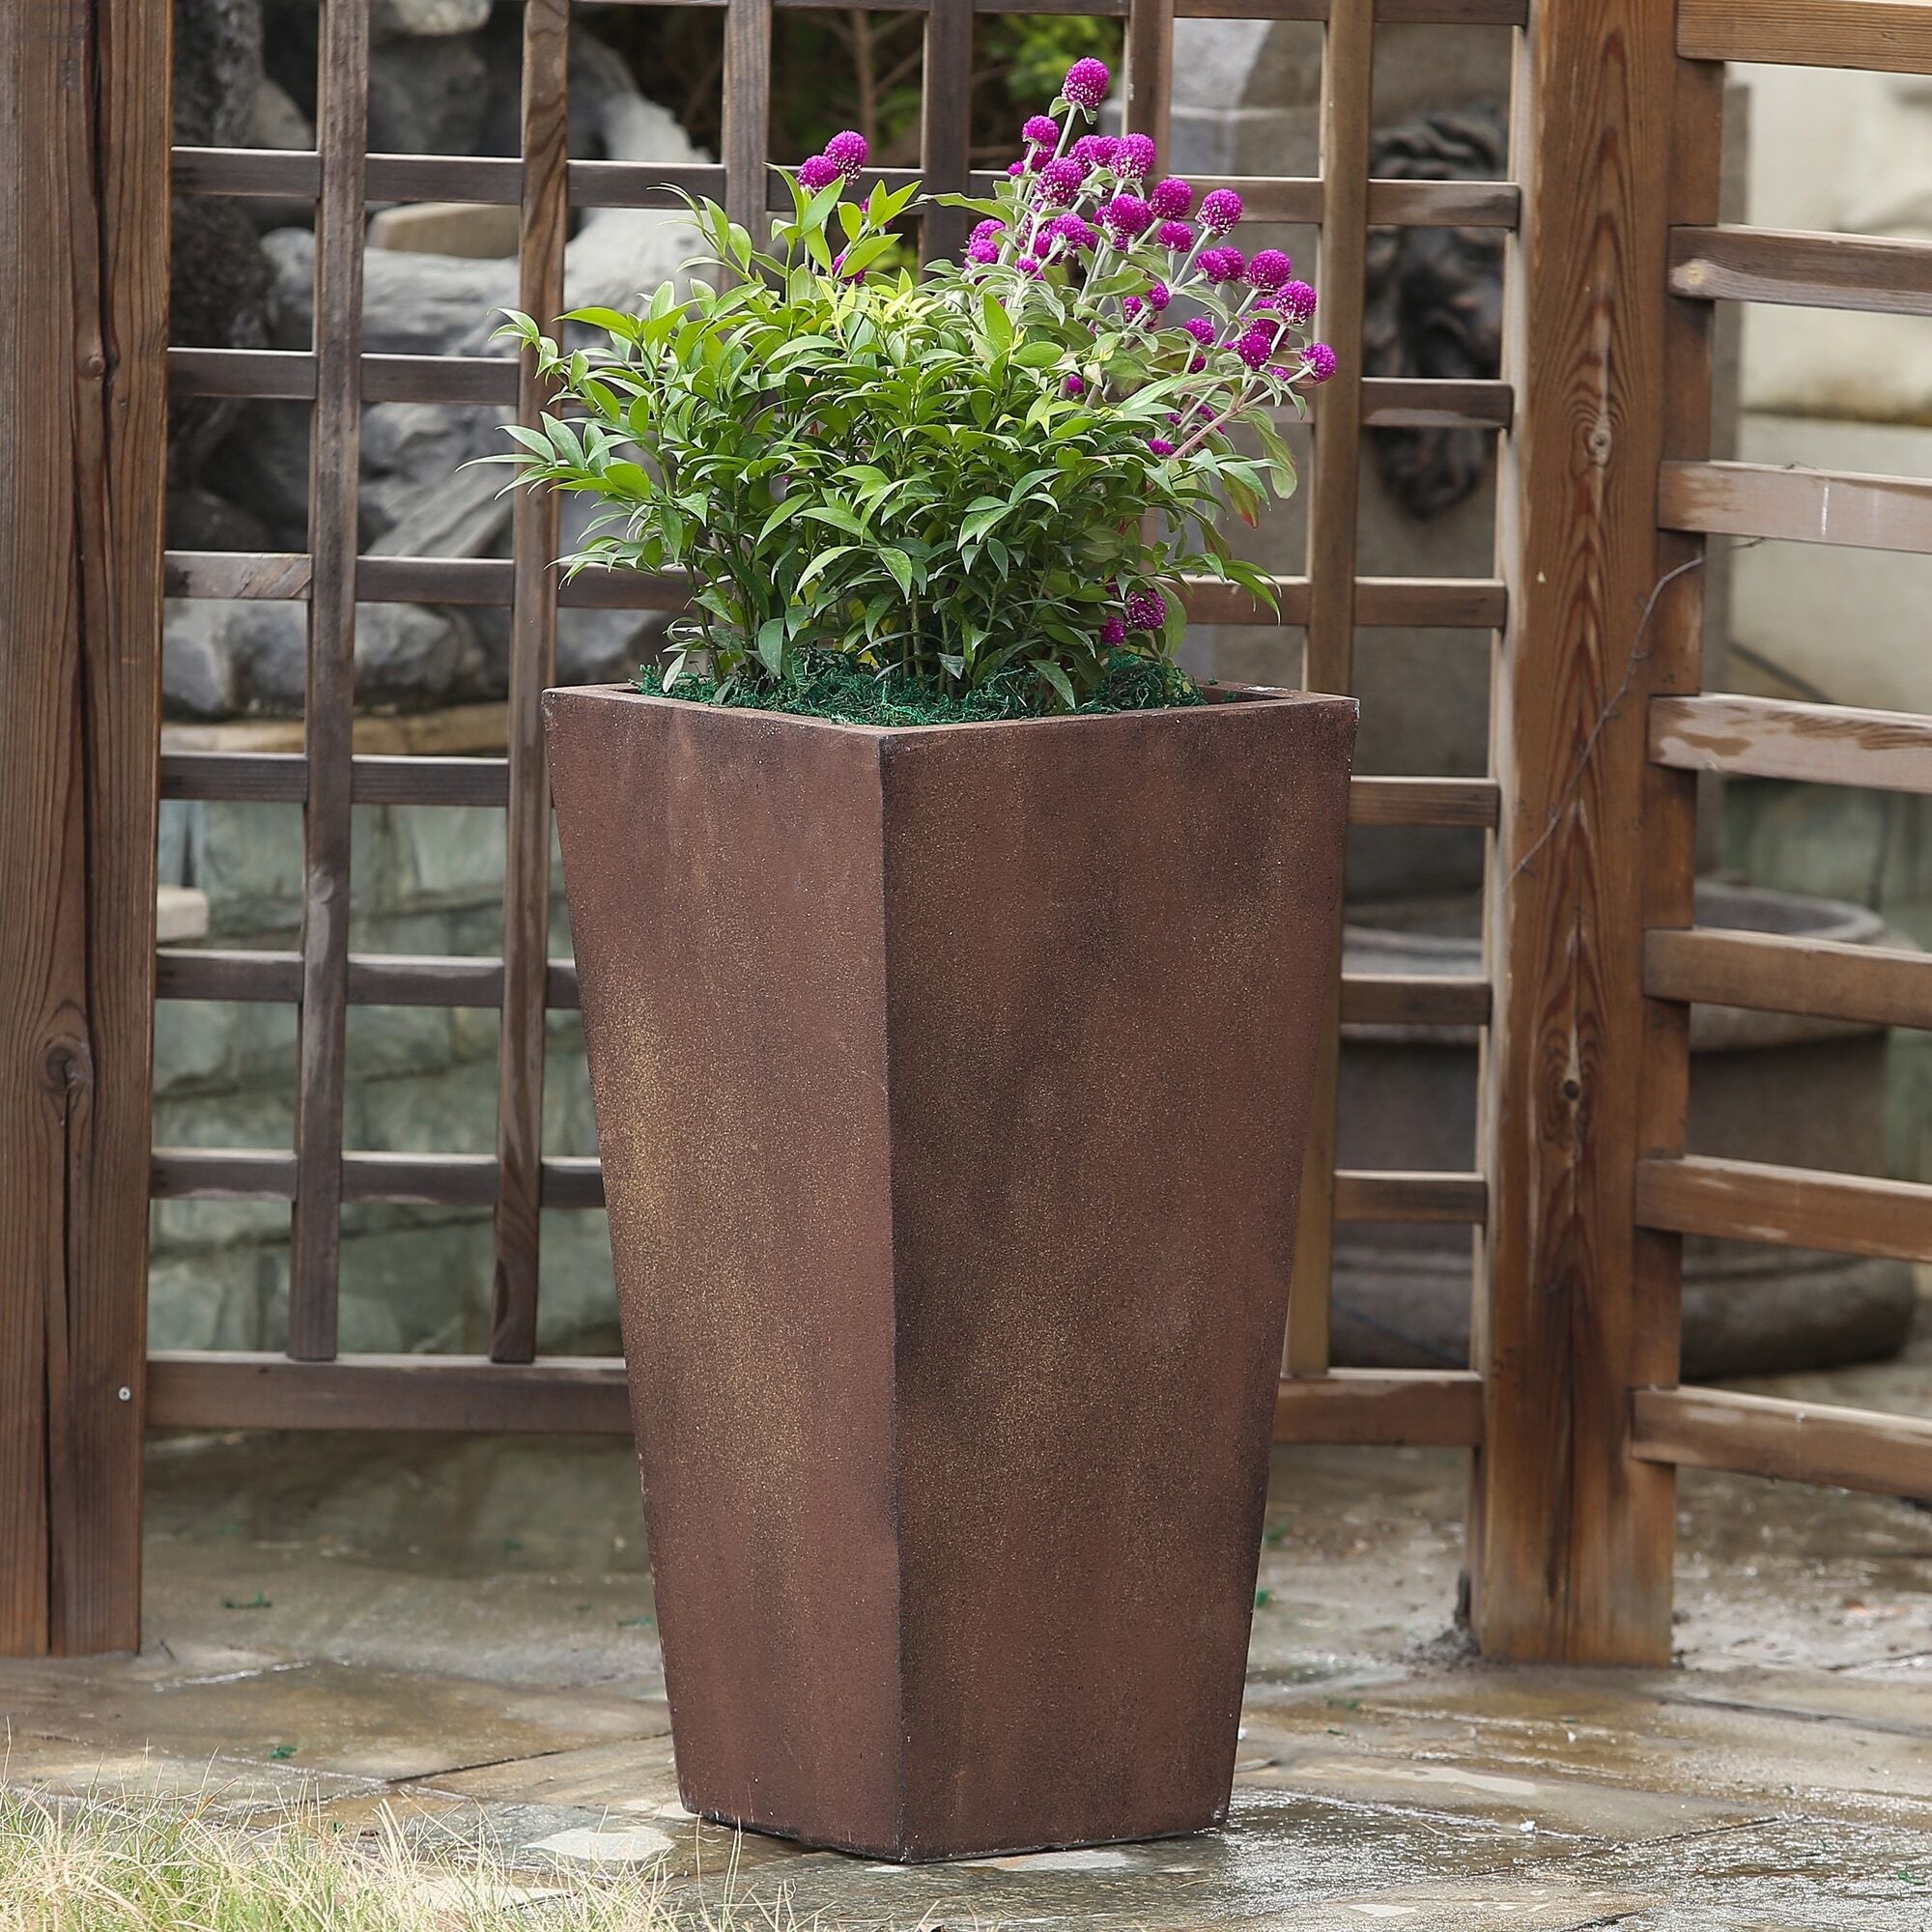 Tall outdoor ceramic planters